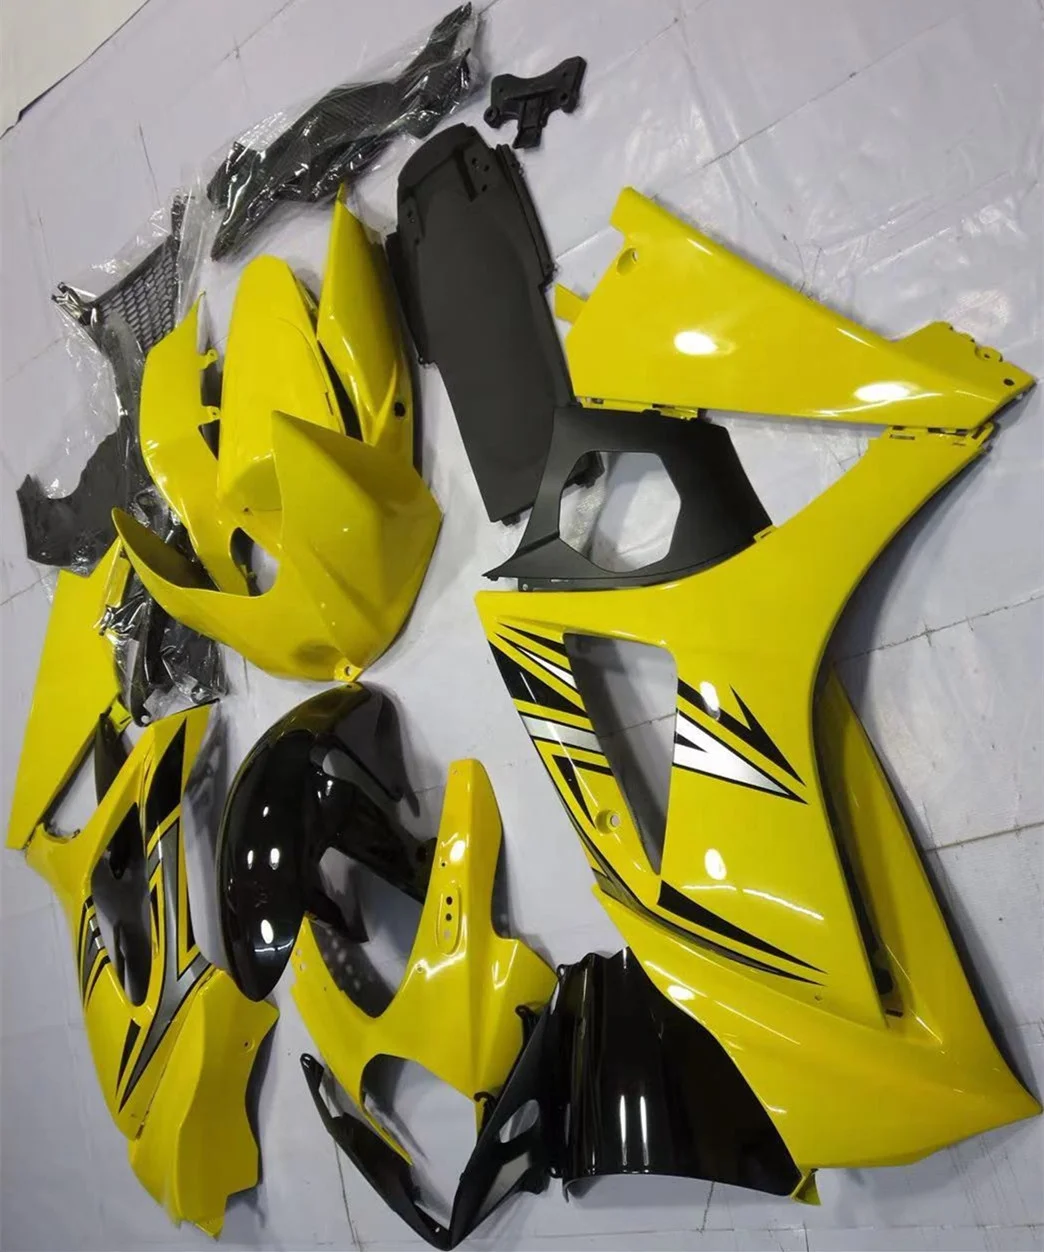 

2022 WHSC Full Motorcycle Fairings Fit For SUZUKI GSXR1000 2007-2008 ABS Plastic Body Work Gray Black Yellow, Pictures shown